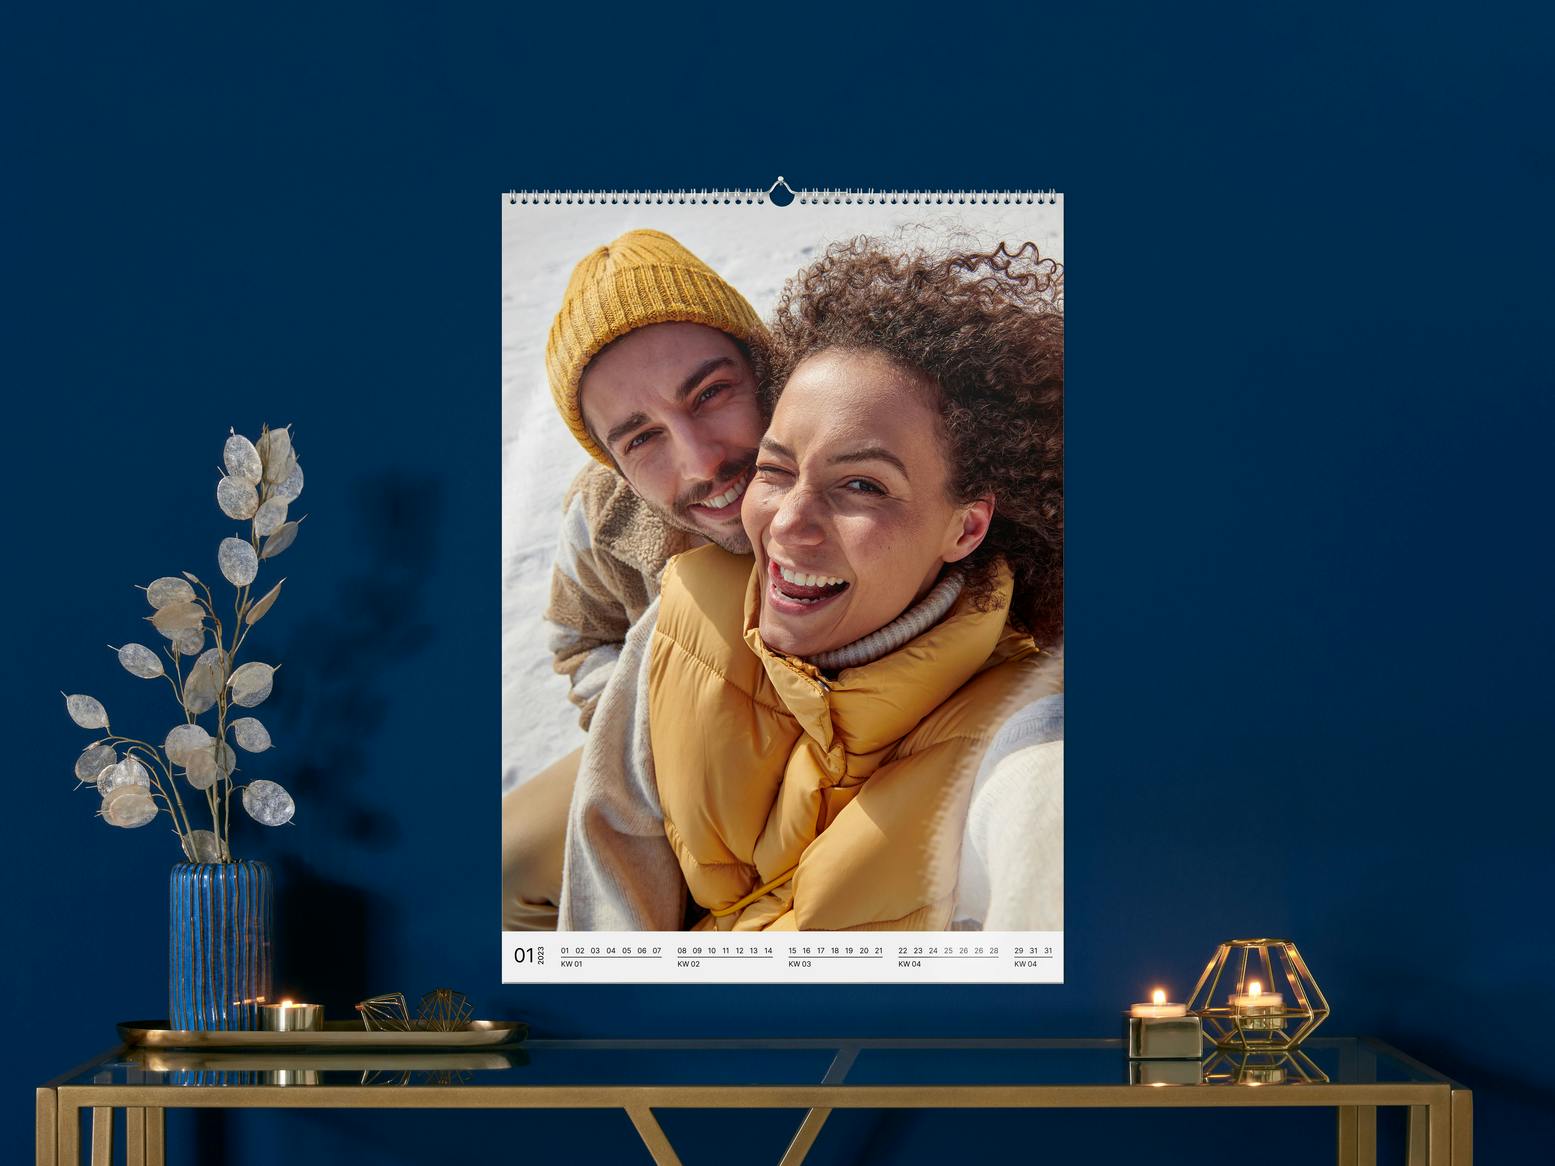 Pixm wall calendar A2 in portrait format with a winter image